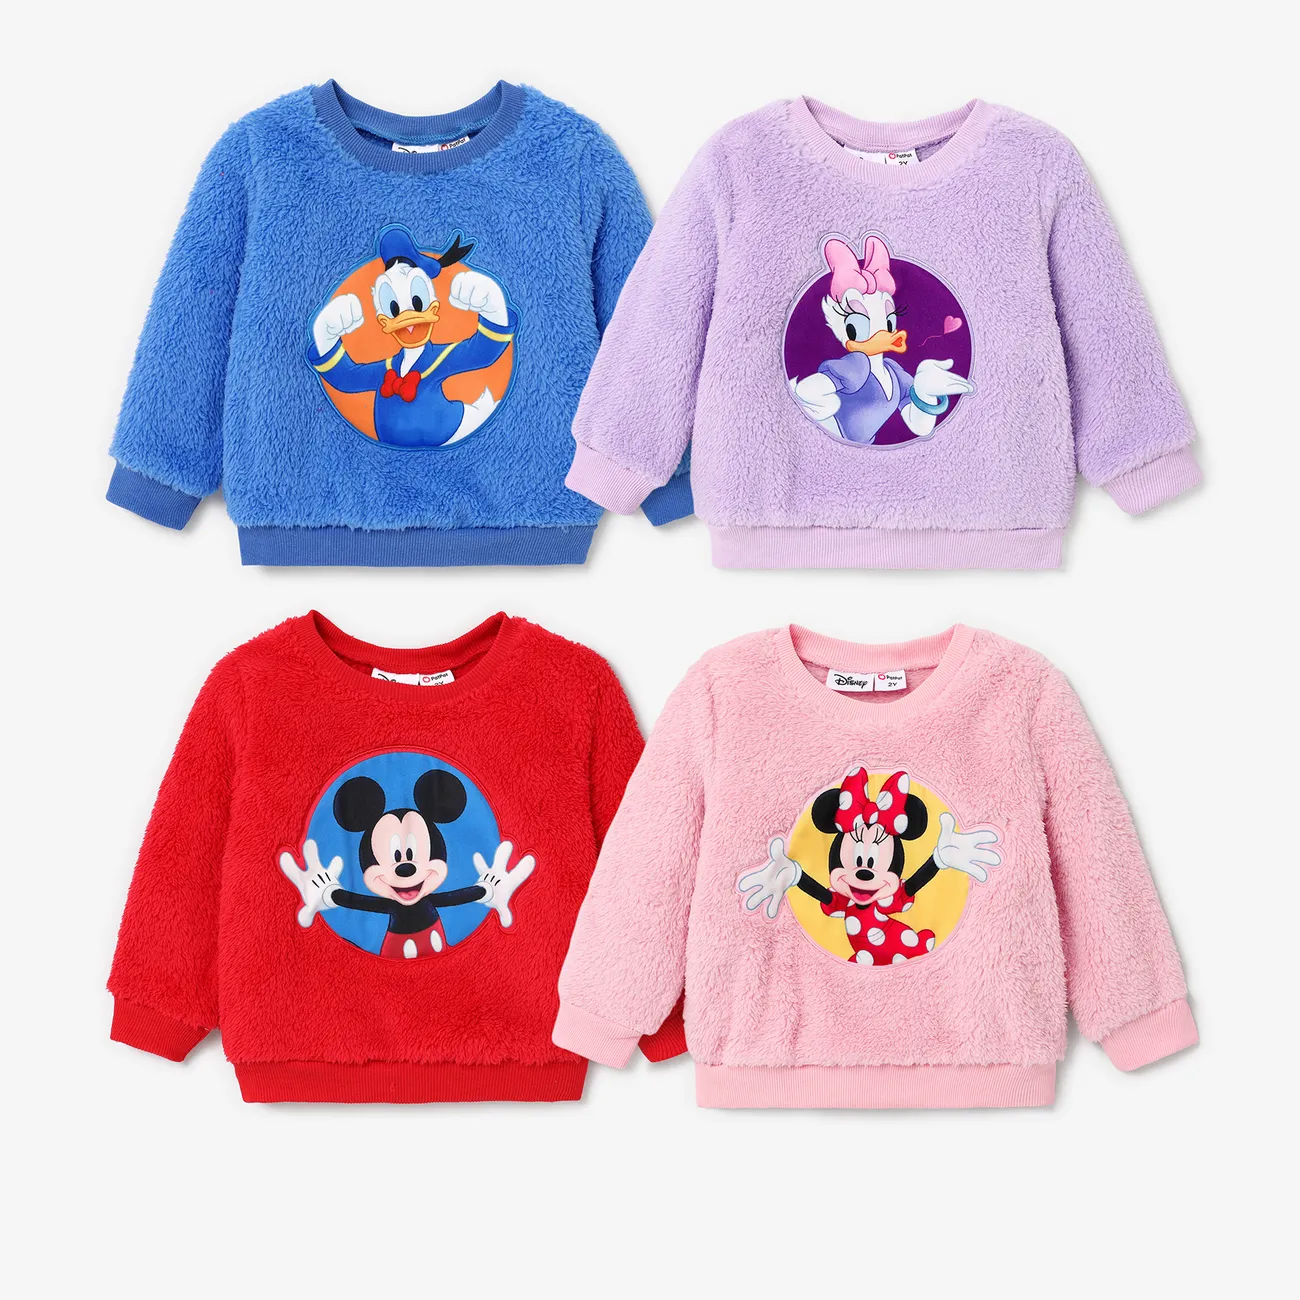 Disney Mickey and Friends Toddler Girl/Boy Character Embroidered Long-sleeve Fluffy Sweatshirt Red big image 1